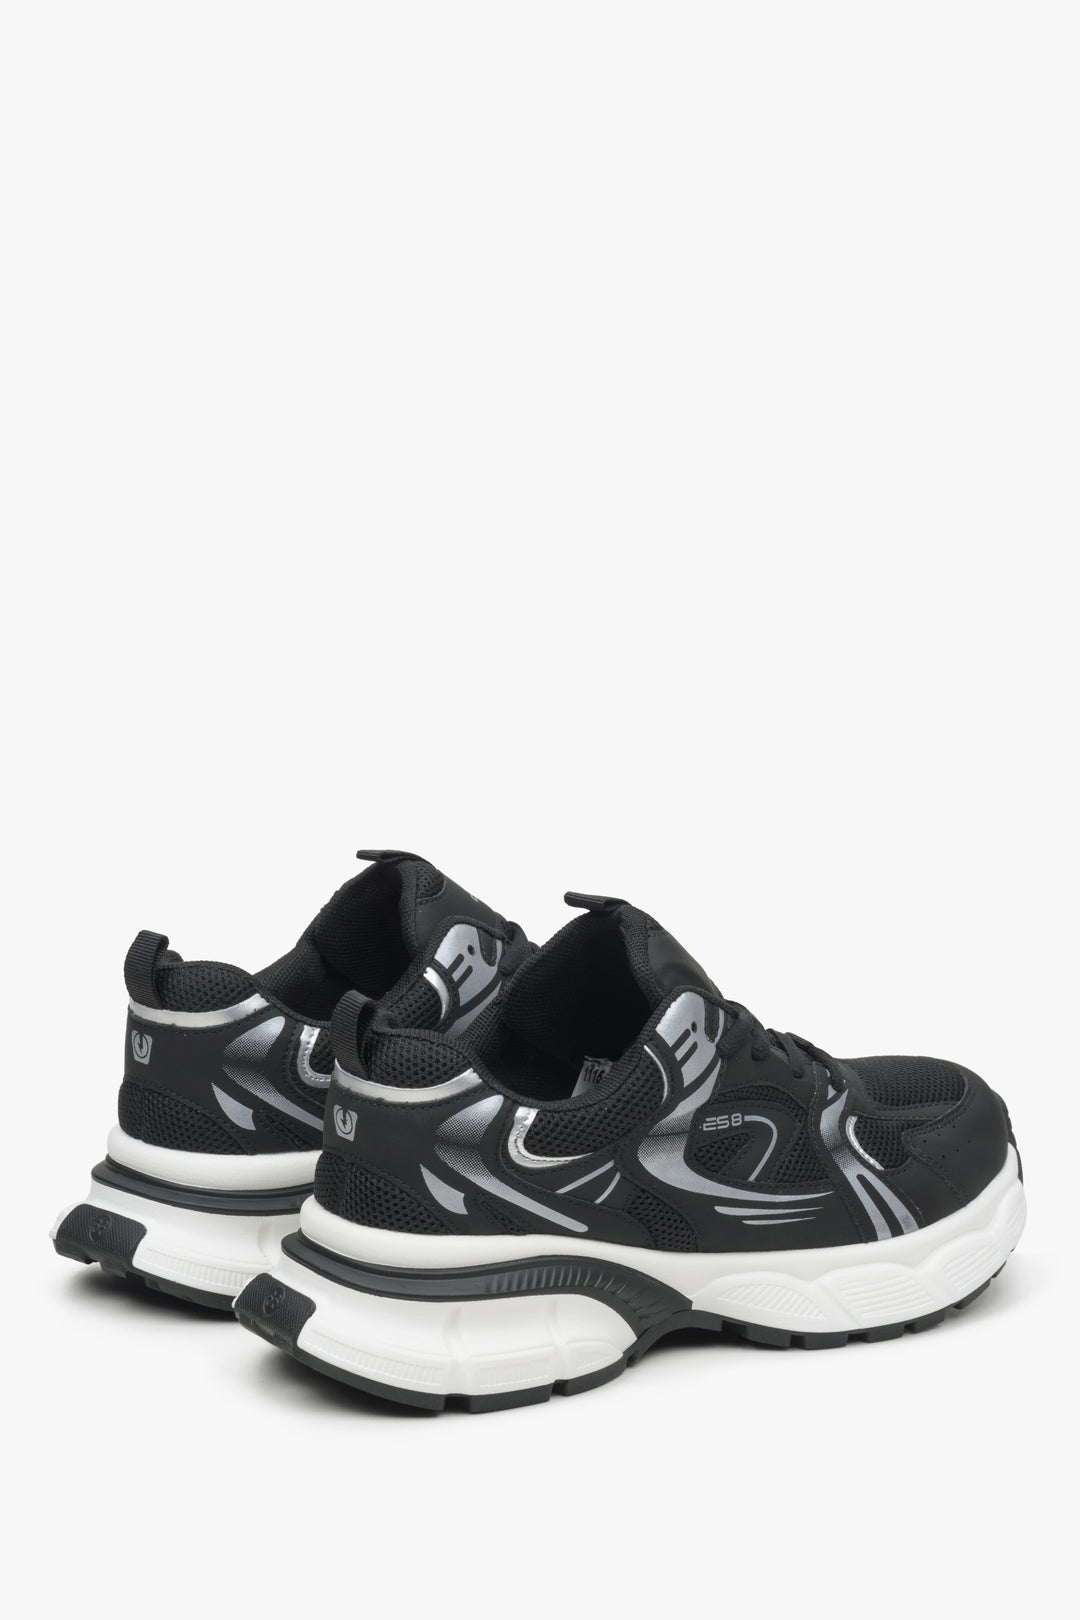 Women's black sneakers ES 8 - close-up on the heel and side line of the shoes.